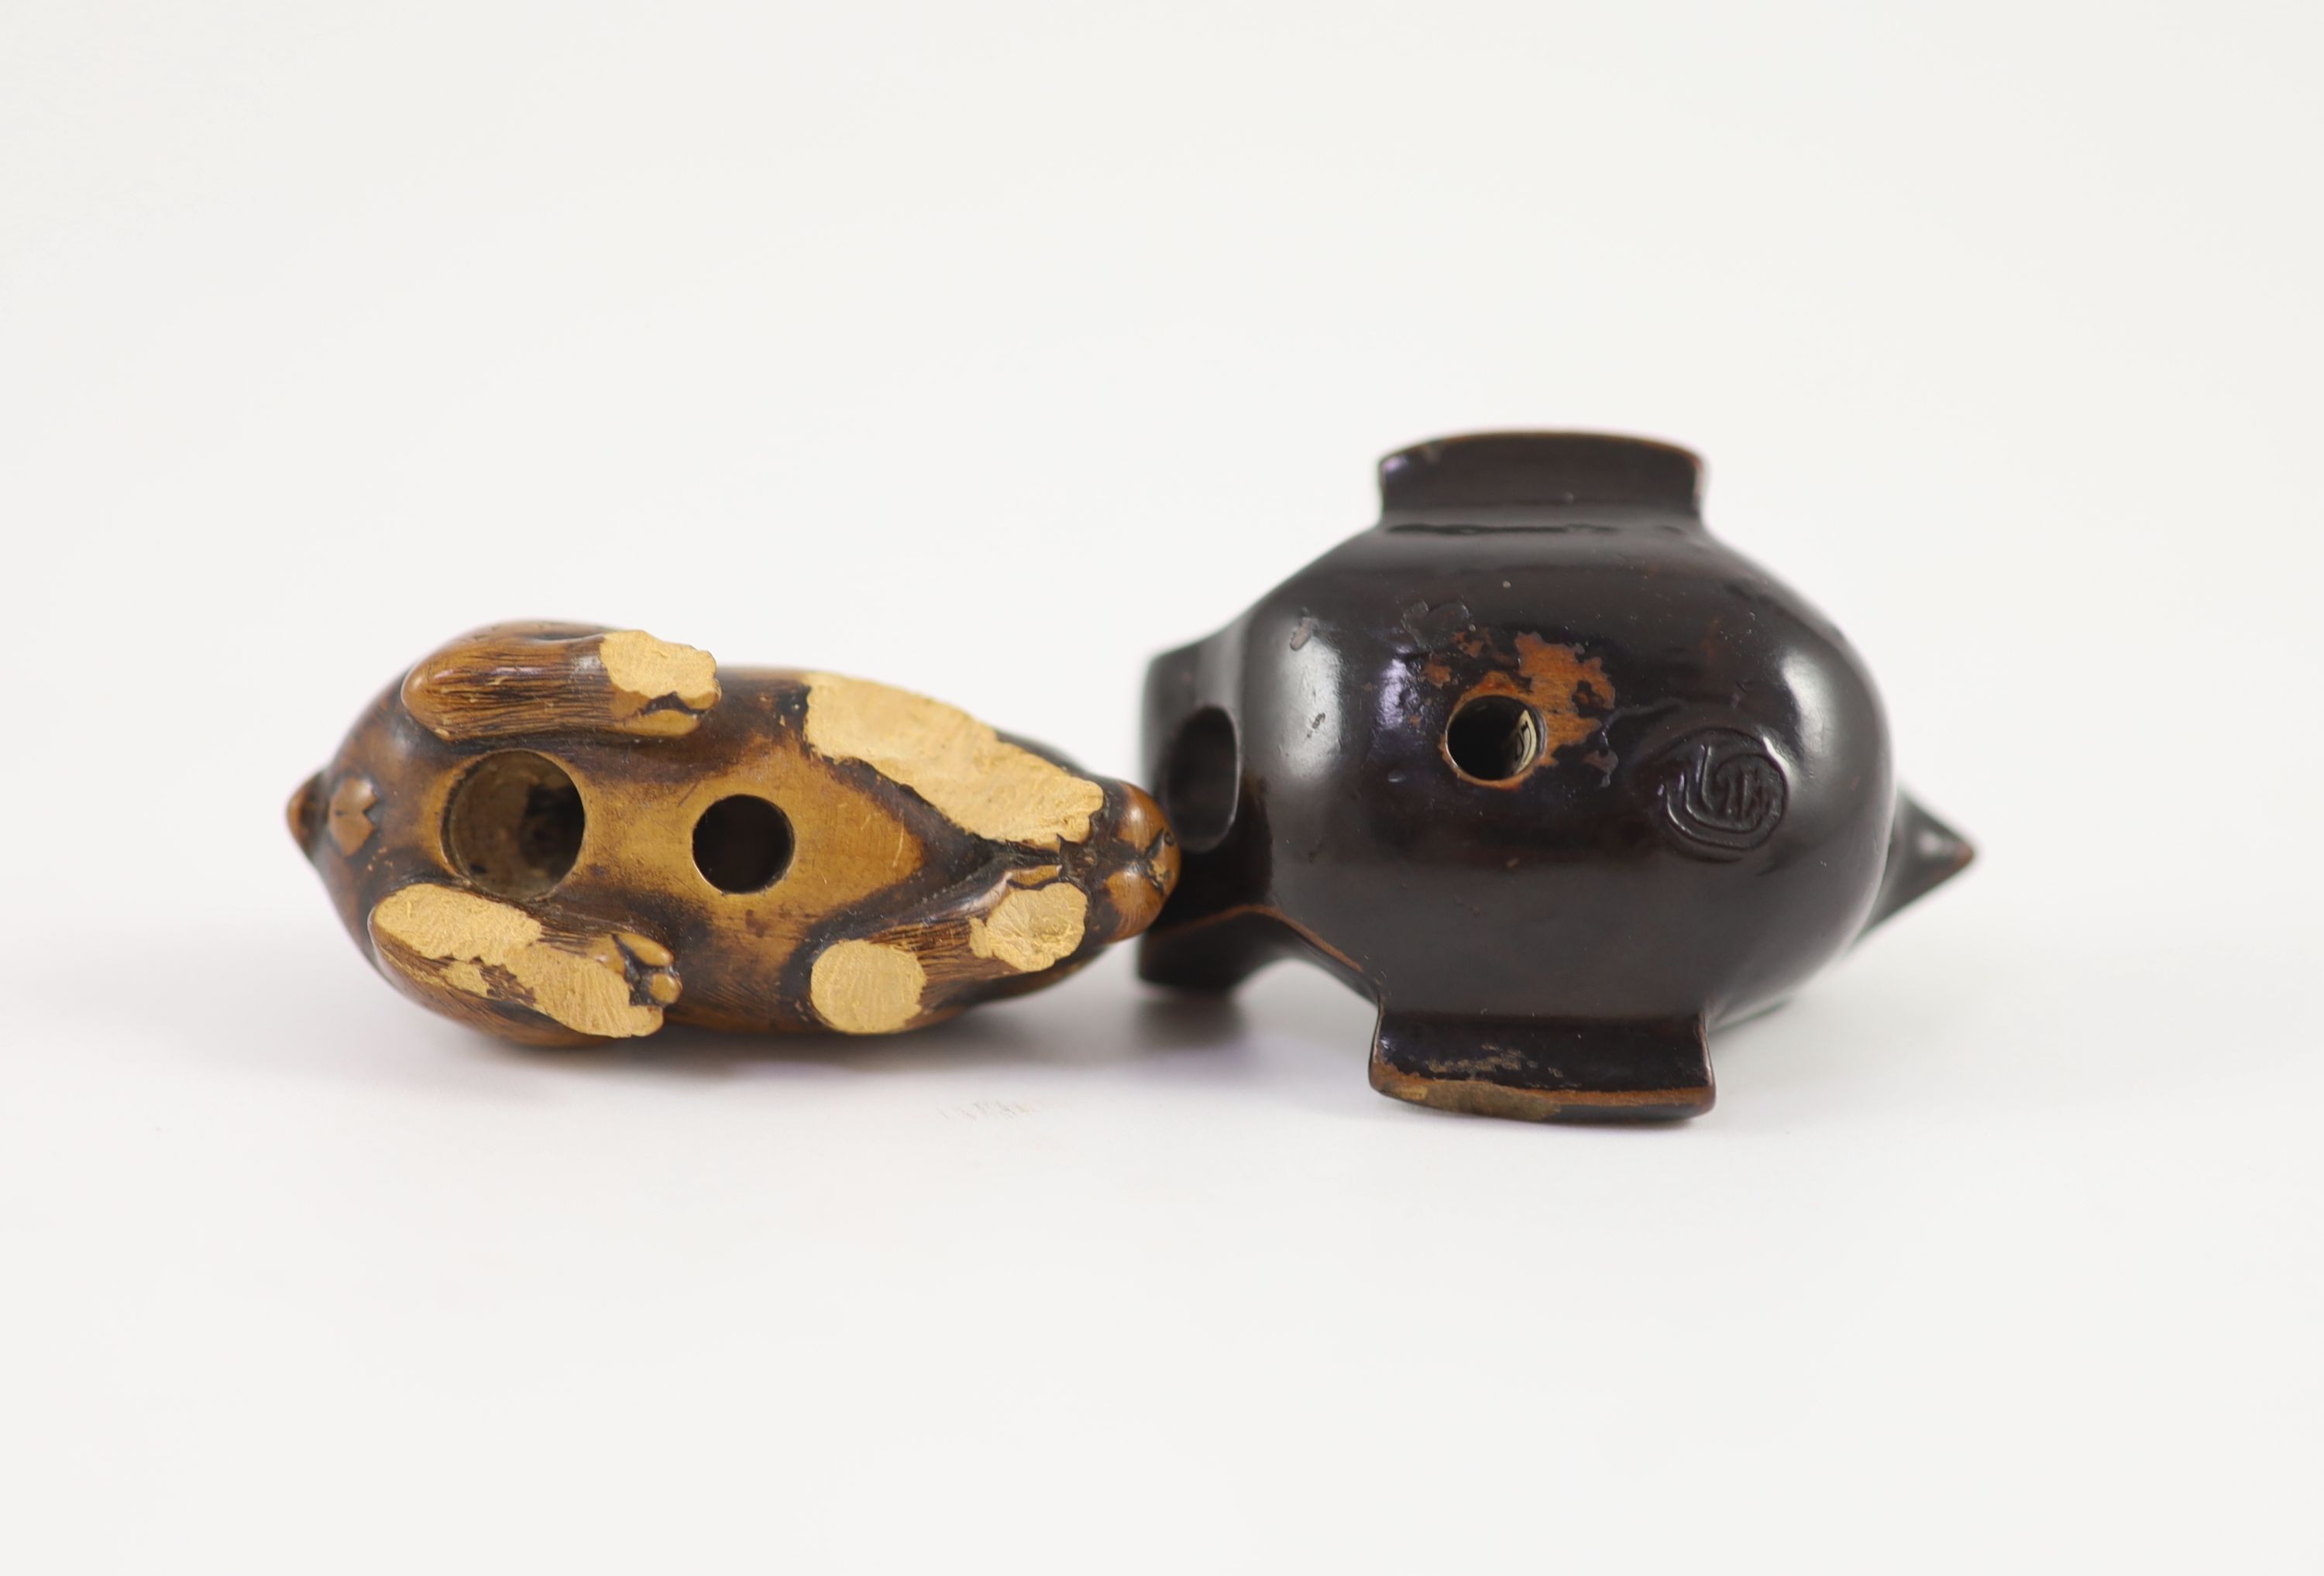 A Japanese lacquered wood netsuke of a bird and a wooden netsuke of a rabbit, 18th/19th century, - Image 4 of 4